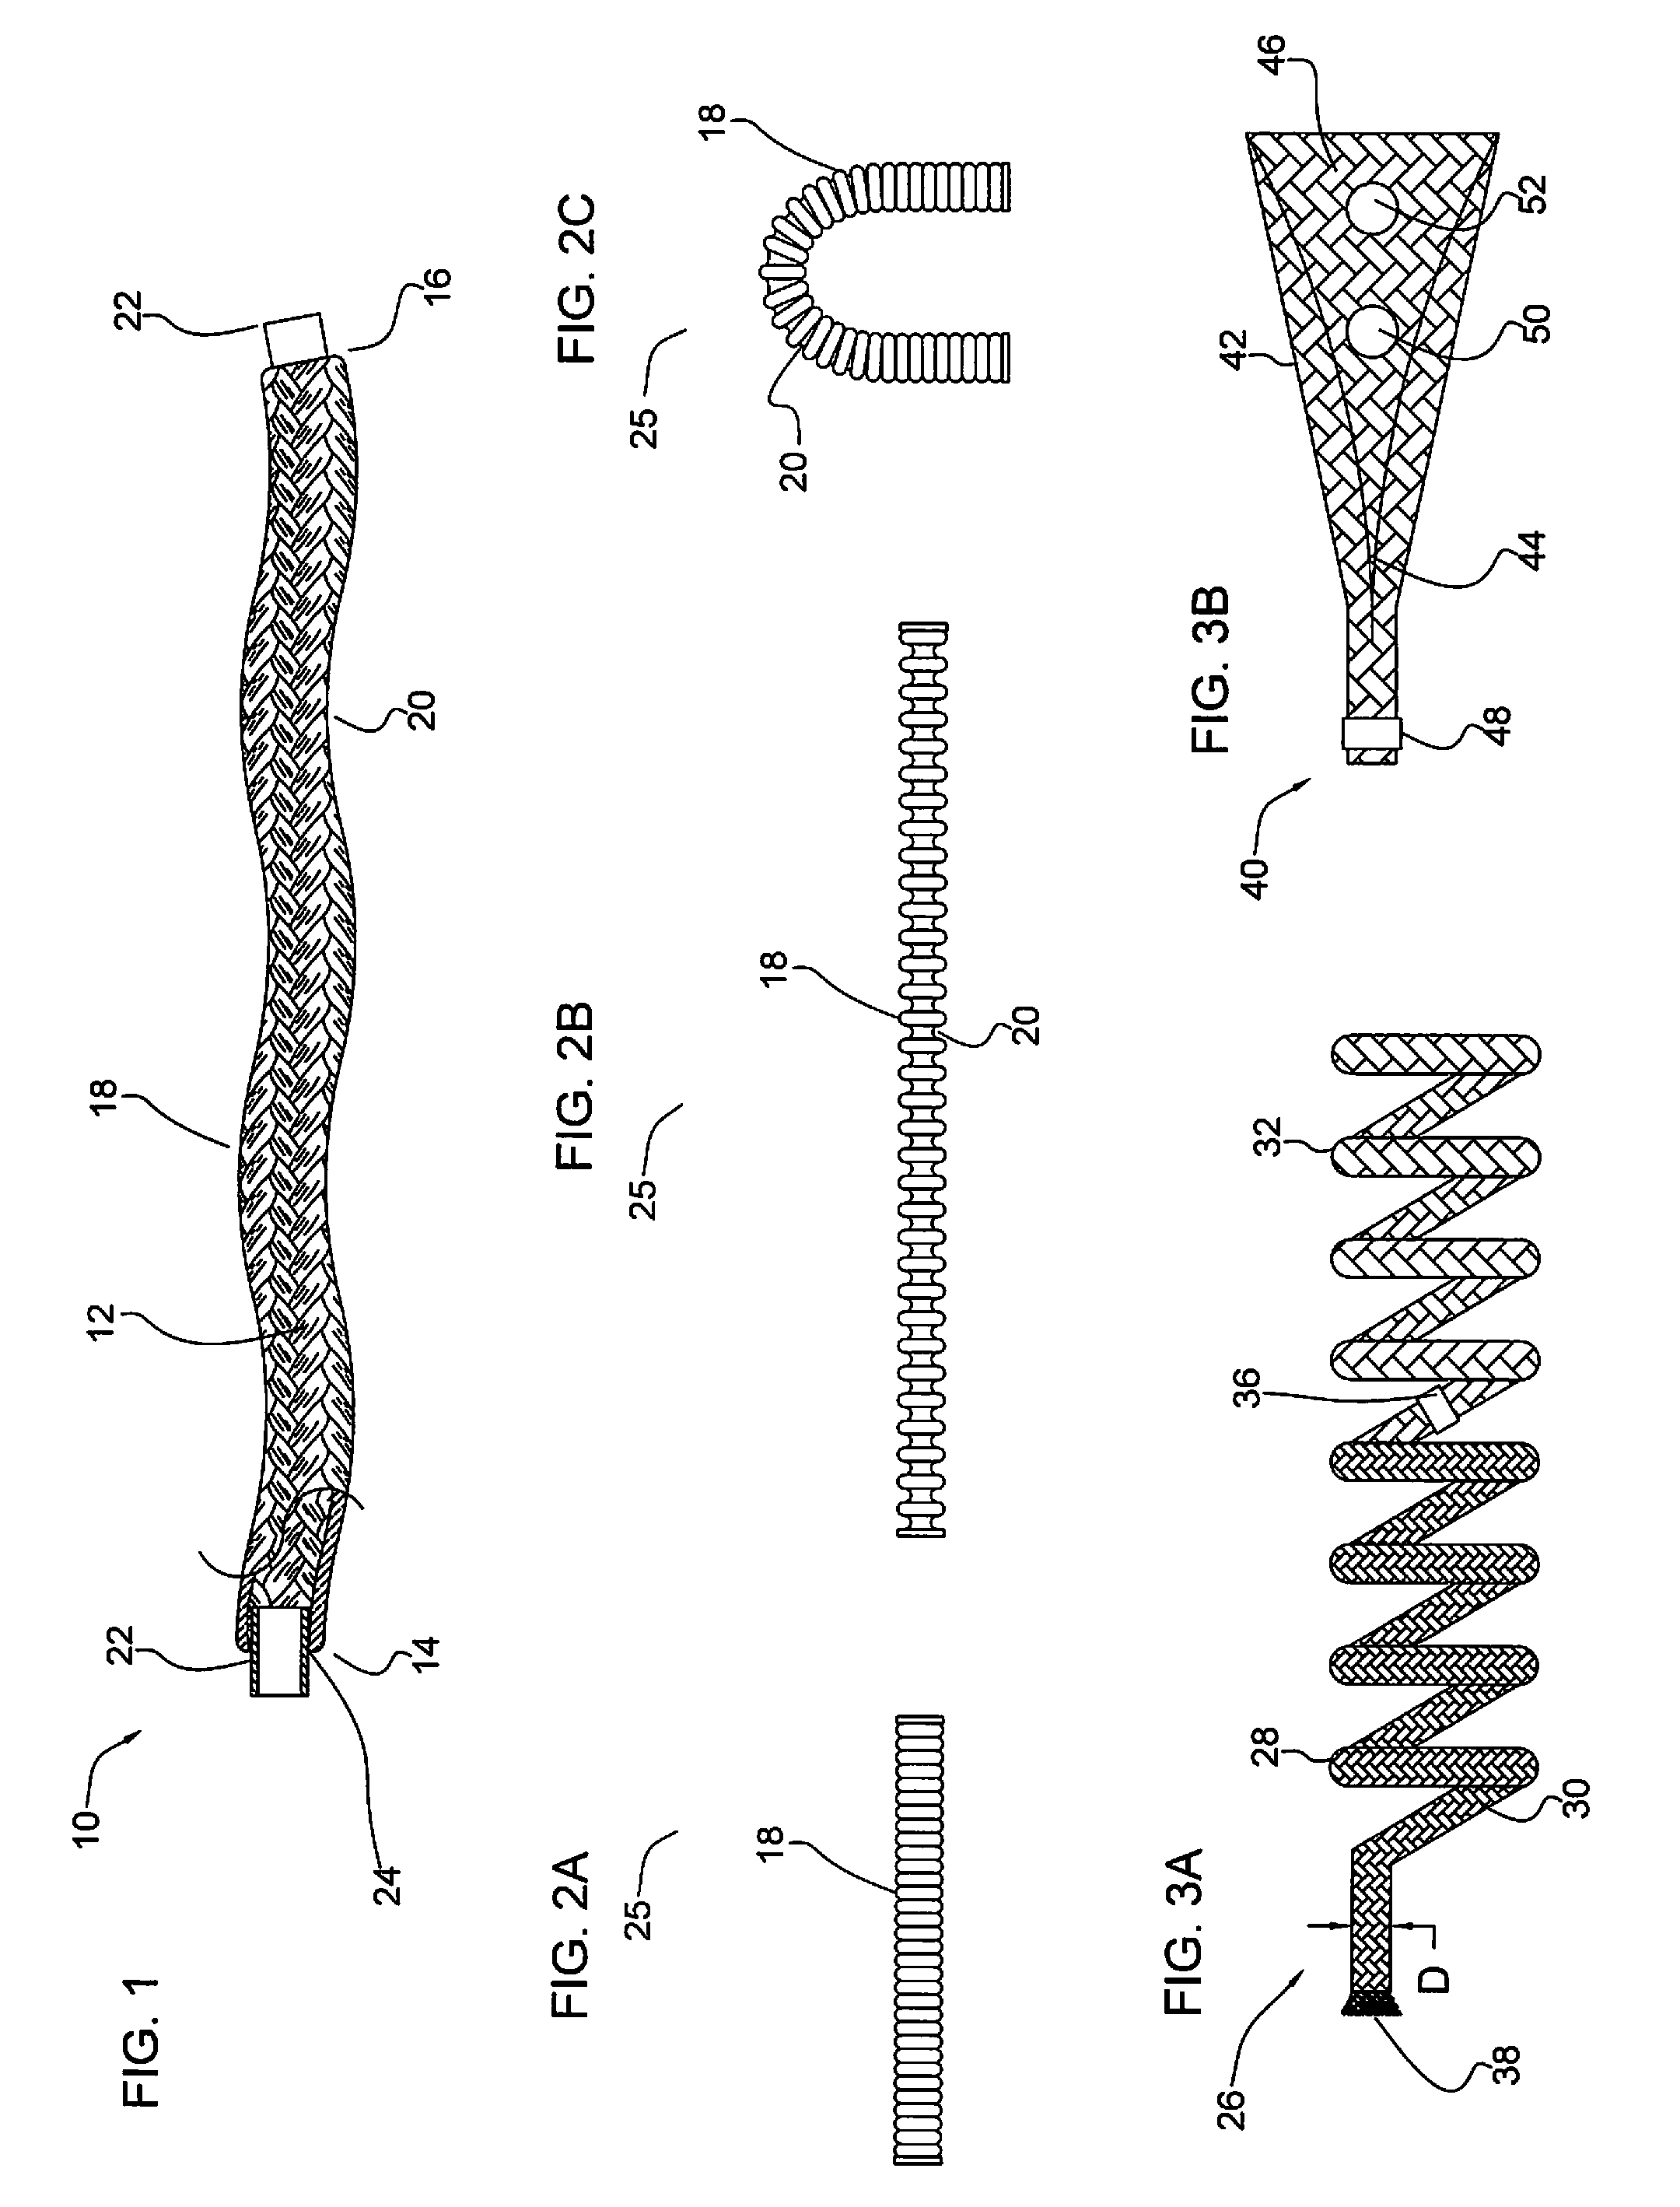 Micrograft for the treatment of intracranial aneurysms and method for use